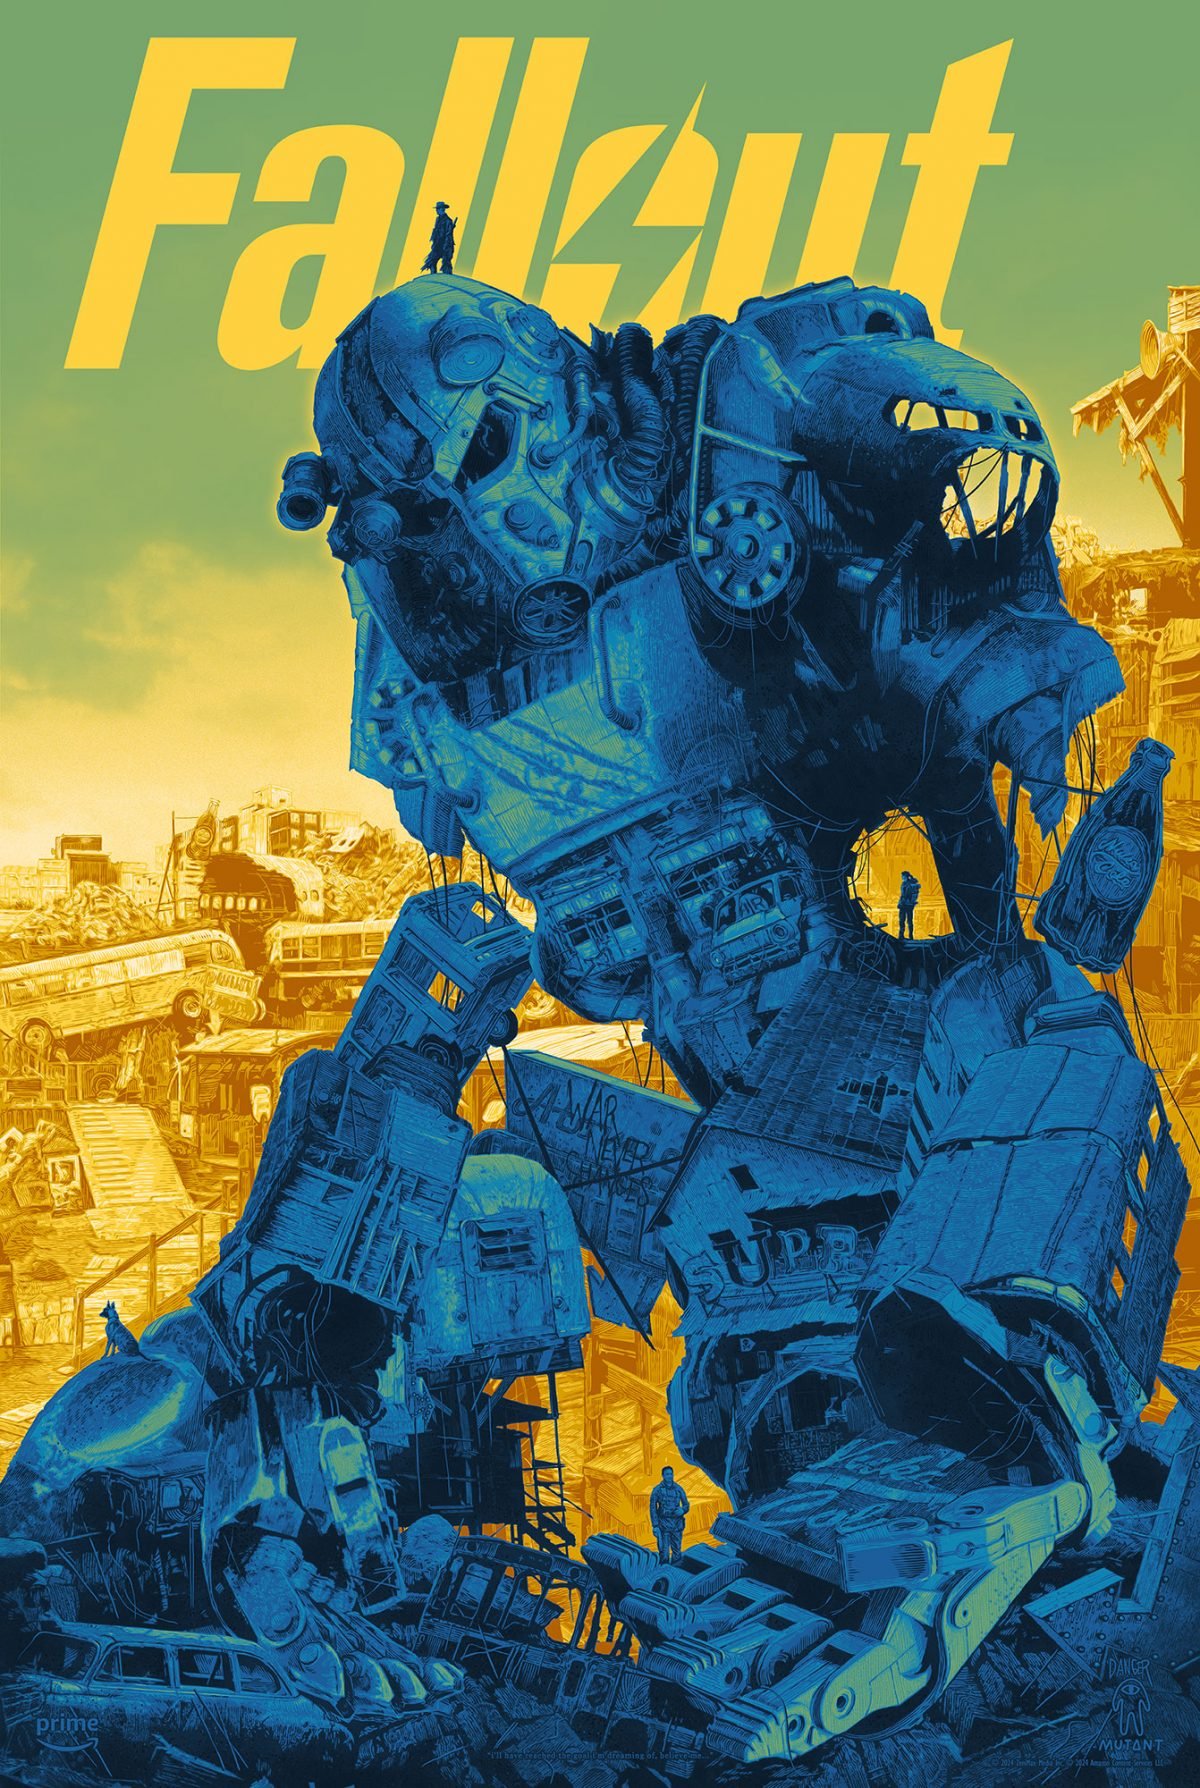 Mutant Fallout Series Poster by Danie Danger SDCC Exclusive Limited Edition Variant